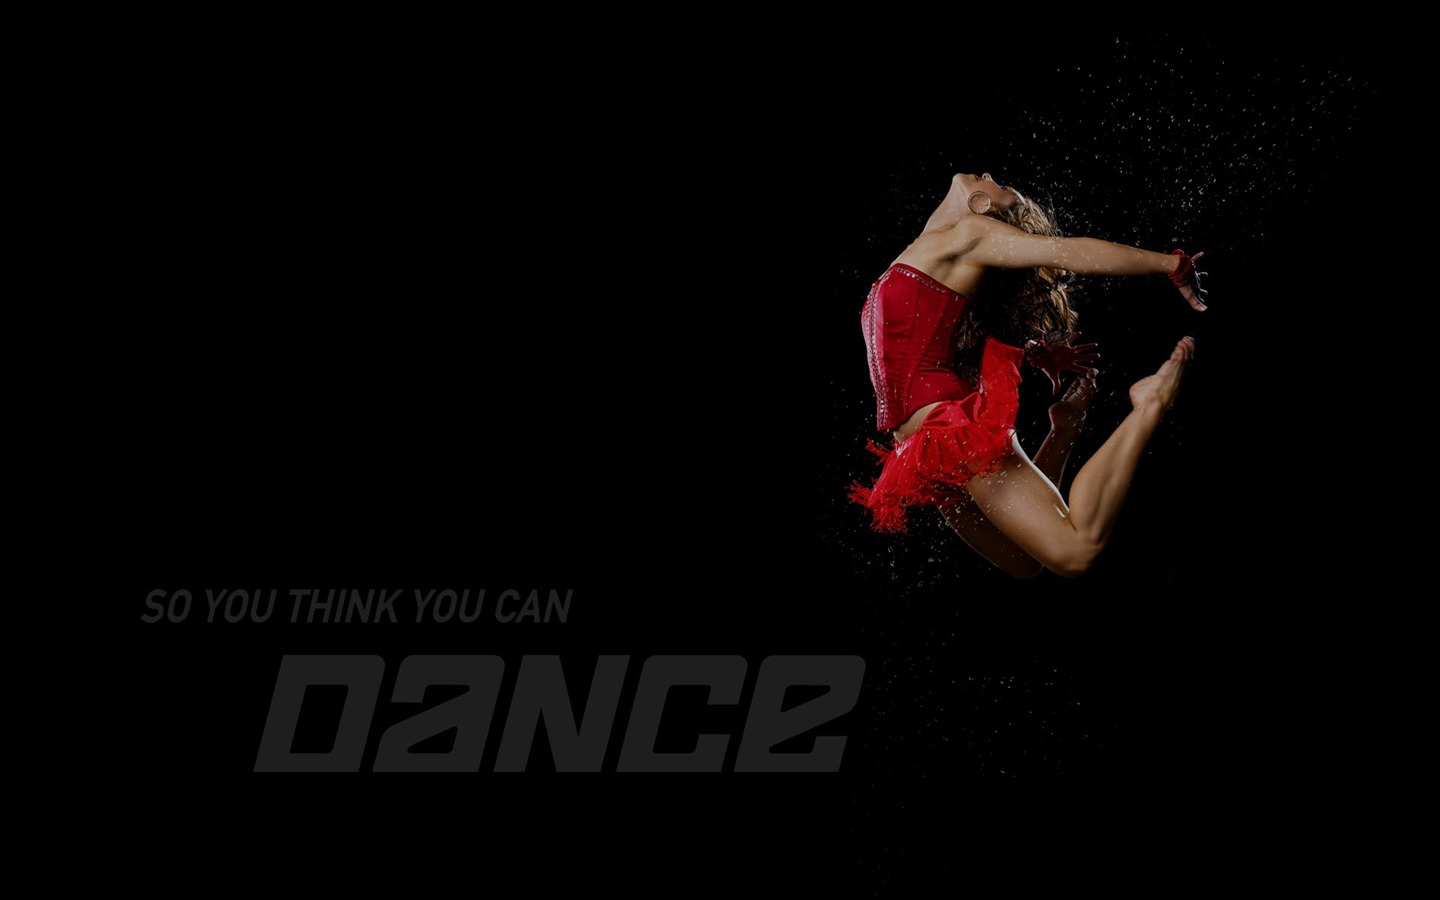 So You Think You Can Dance 舞林争霸 壁纸(二)1 - 1440x900